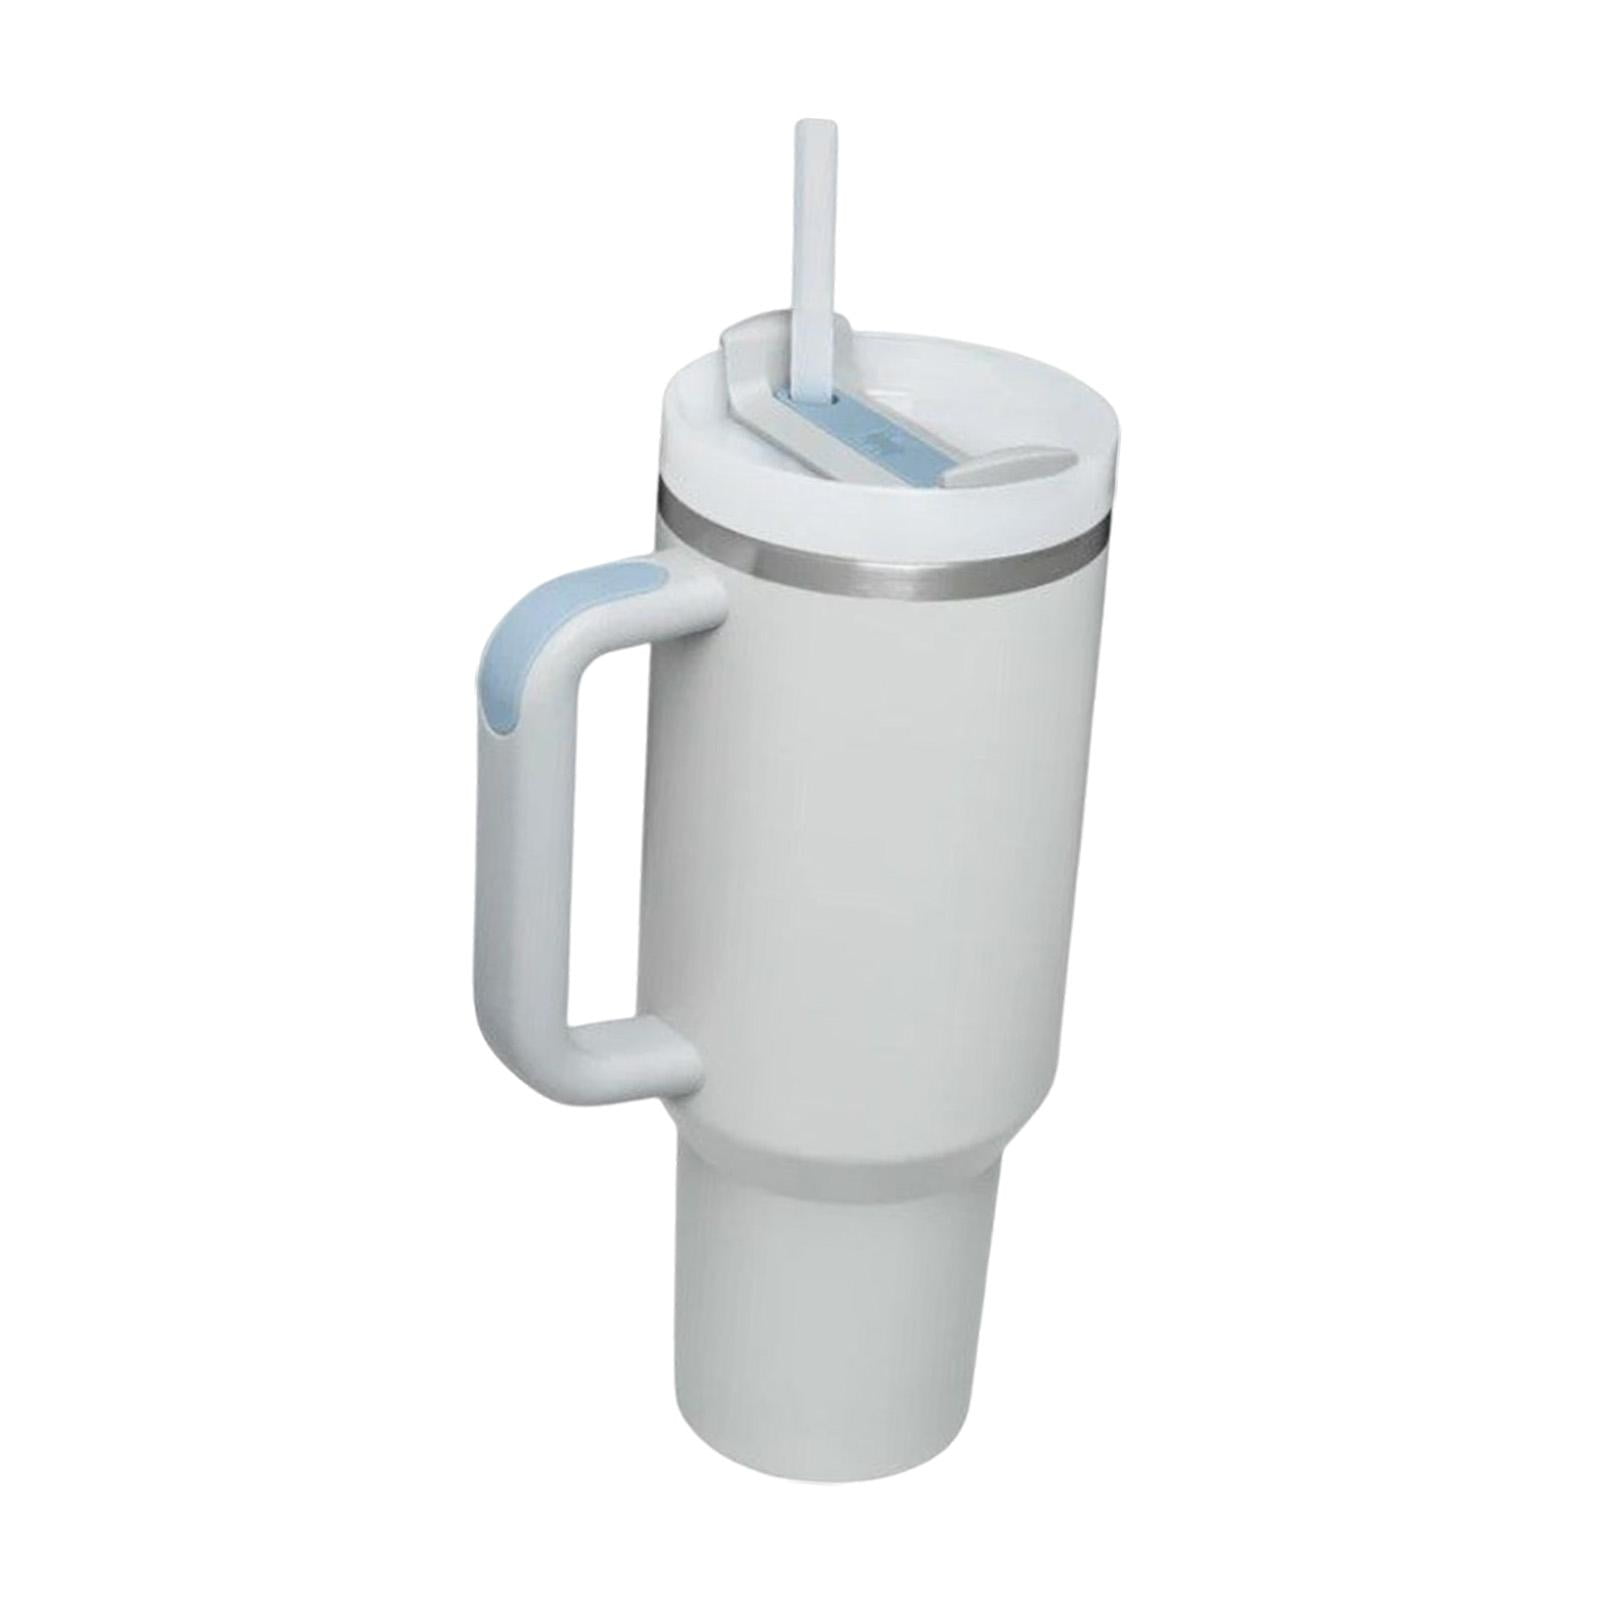 Dropship 40oz Handle Car Cup With Pipette Stainless Steel